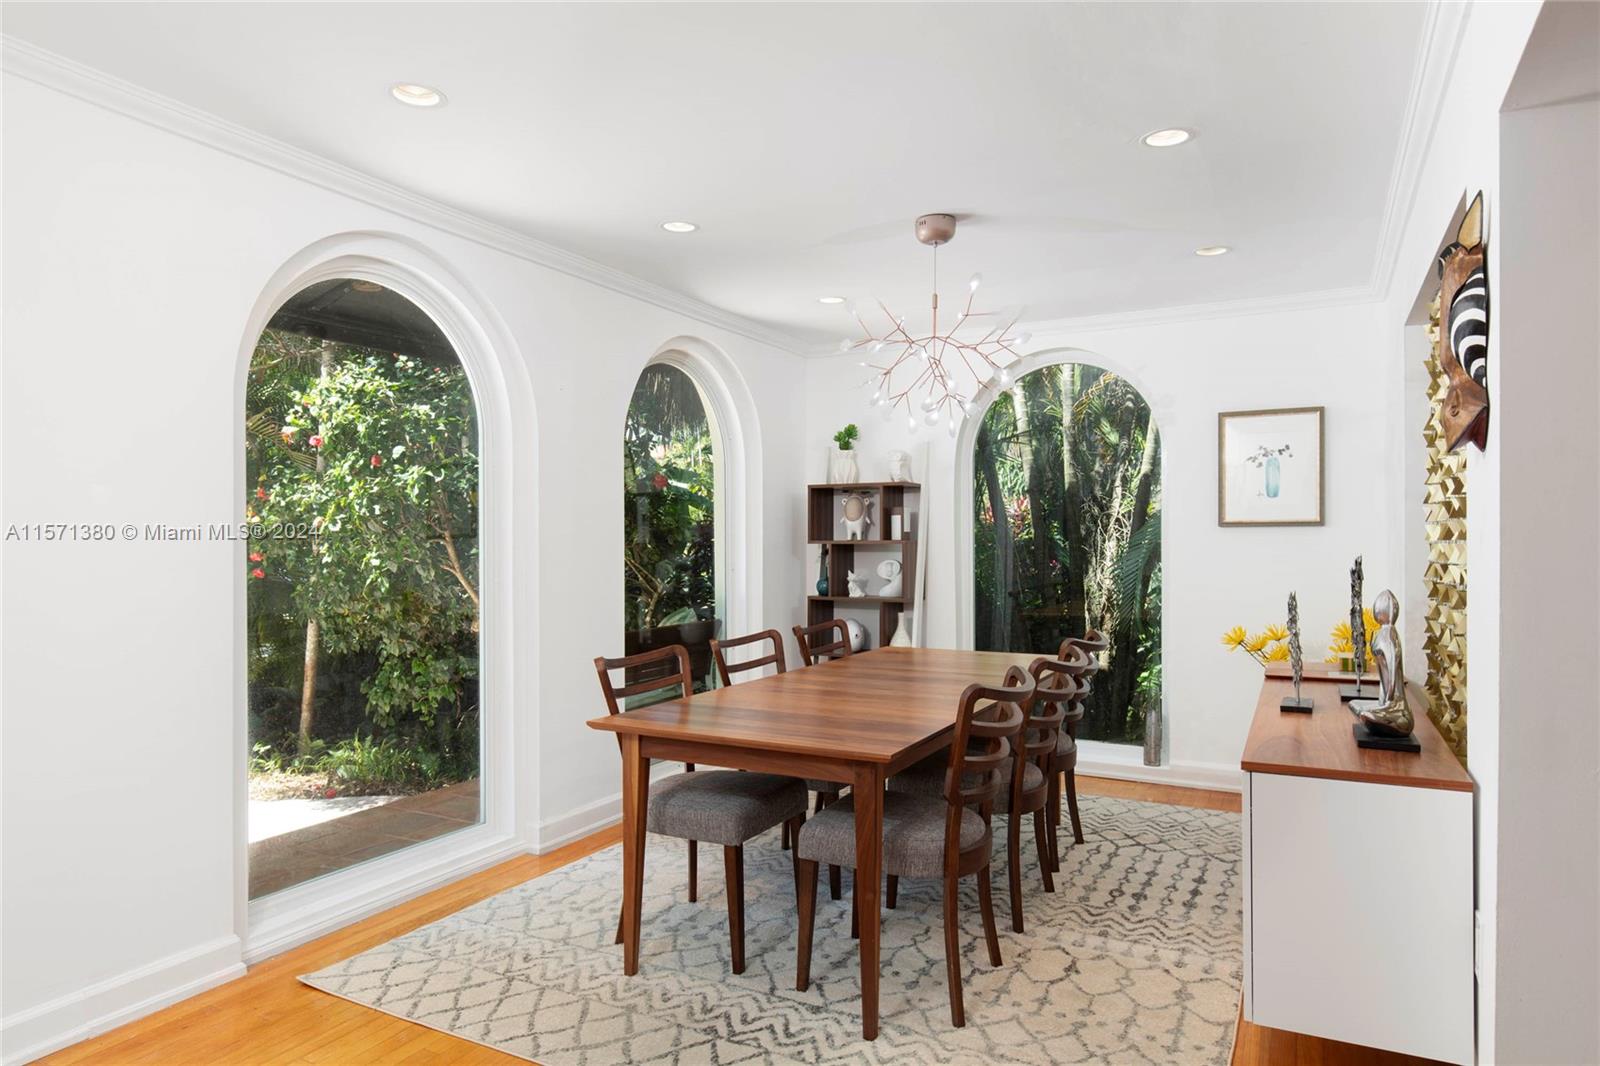 Fall in love with this ultra chic and charming villa in Coconut Grove’s most coveted community, the Utopia Homeowner’s Association. Enjoy a lush and idyllic street with a neighborhood feel while being minutes from top parks, schools, dining, and the bay. This inviting home seamlessly blends historic charm and modern design to be move-in ready. Abundant natural light, arched windows, hardwood floors, and wood-burning fireplace complement renovated kitchen and baths, flexible floor plan, impact windows/doors, and spacious primary suite with bonus space. Your tropical backyard oasis features a sparkling glass tile pool, Ipe wood deck, and outdoor shower. The detached guest house offers both privacy and comfort for all your family’s needs. The absolute best that the South Grove has to offer!